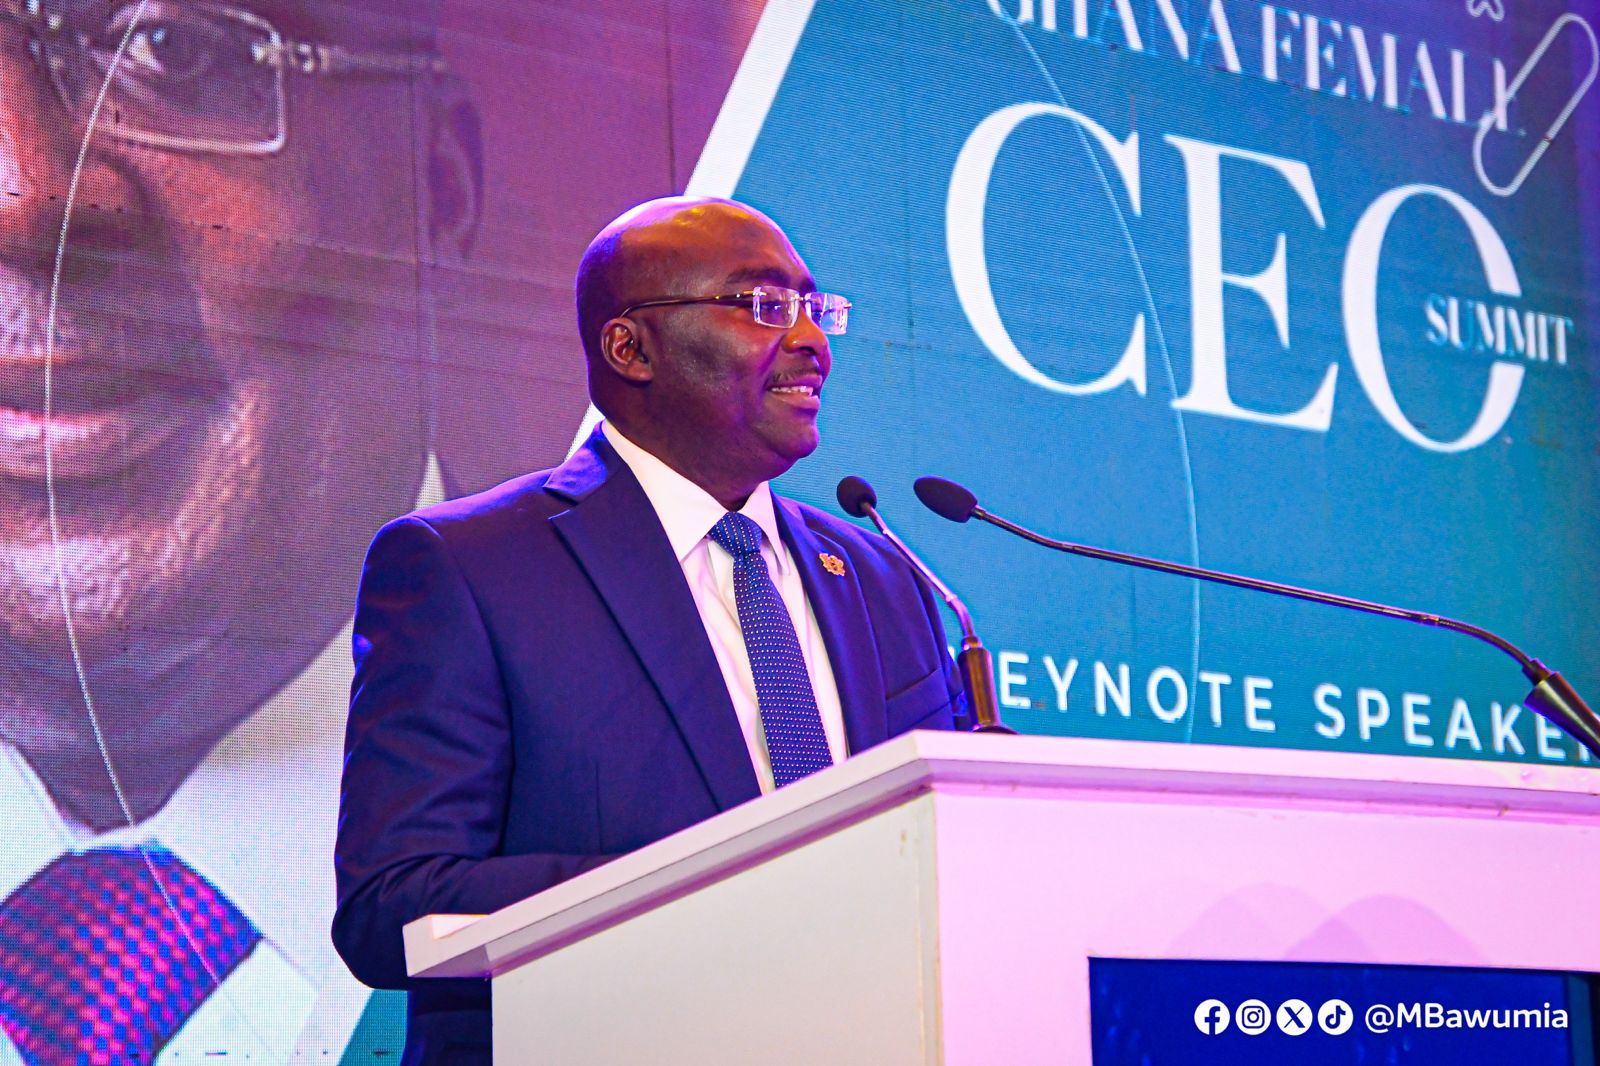 VP Bawumia calls for more focus on empowering women and harnessing their talents for inclusive development